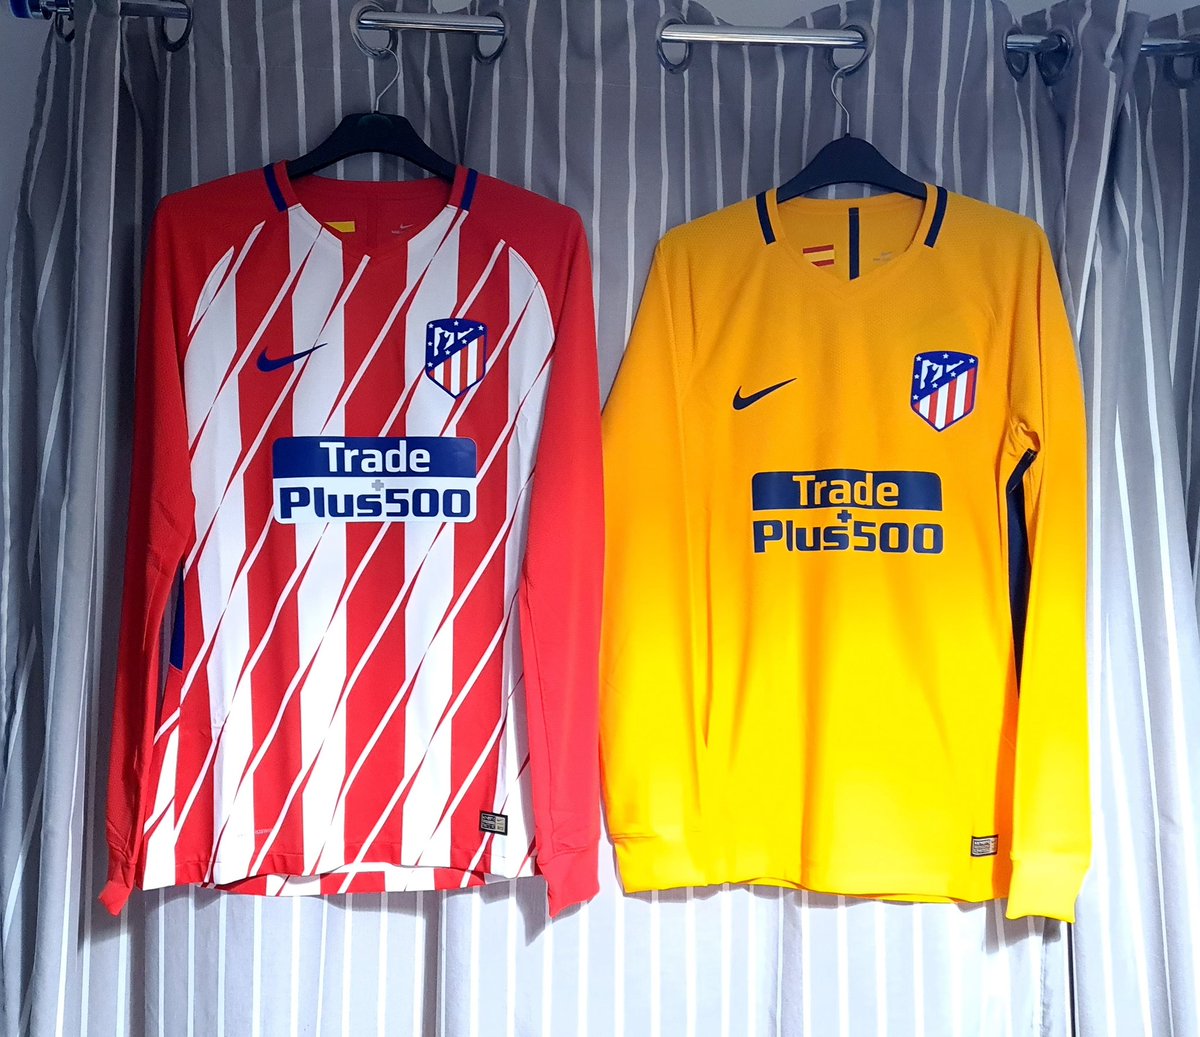 Player-Issue kits, referred by Puma and Adidas as Authentic, and Nike as Vaporknit, differ in sizing As they're designed for players, the difference between sizes is relatively smaller, and you may want to go a size up if buying oneThis is a Vaporknit L with a Vaporknit M